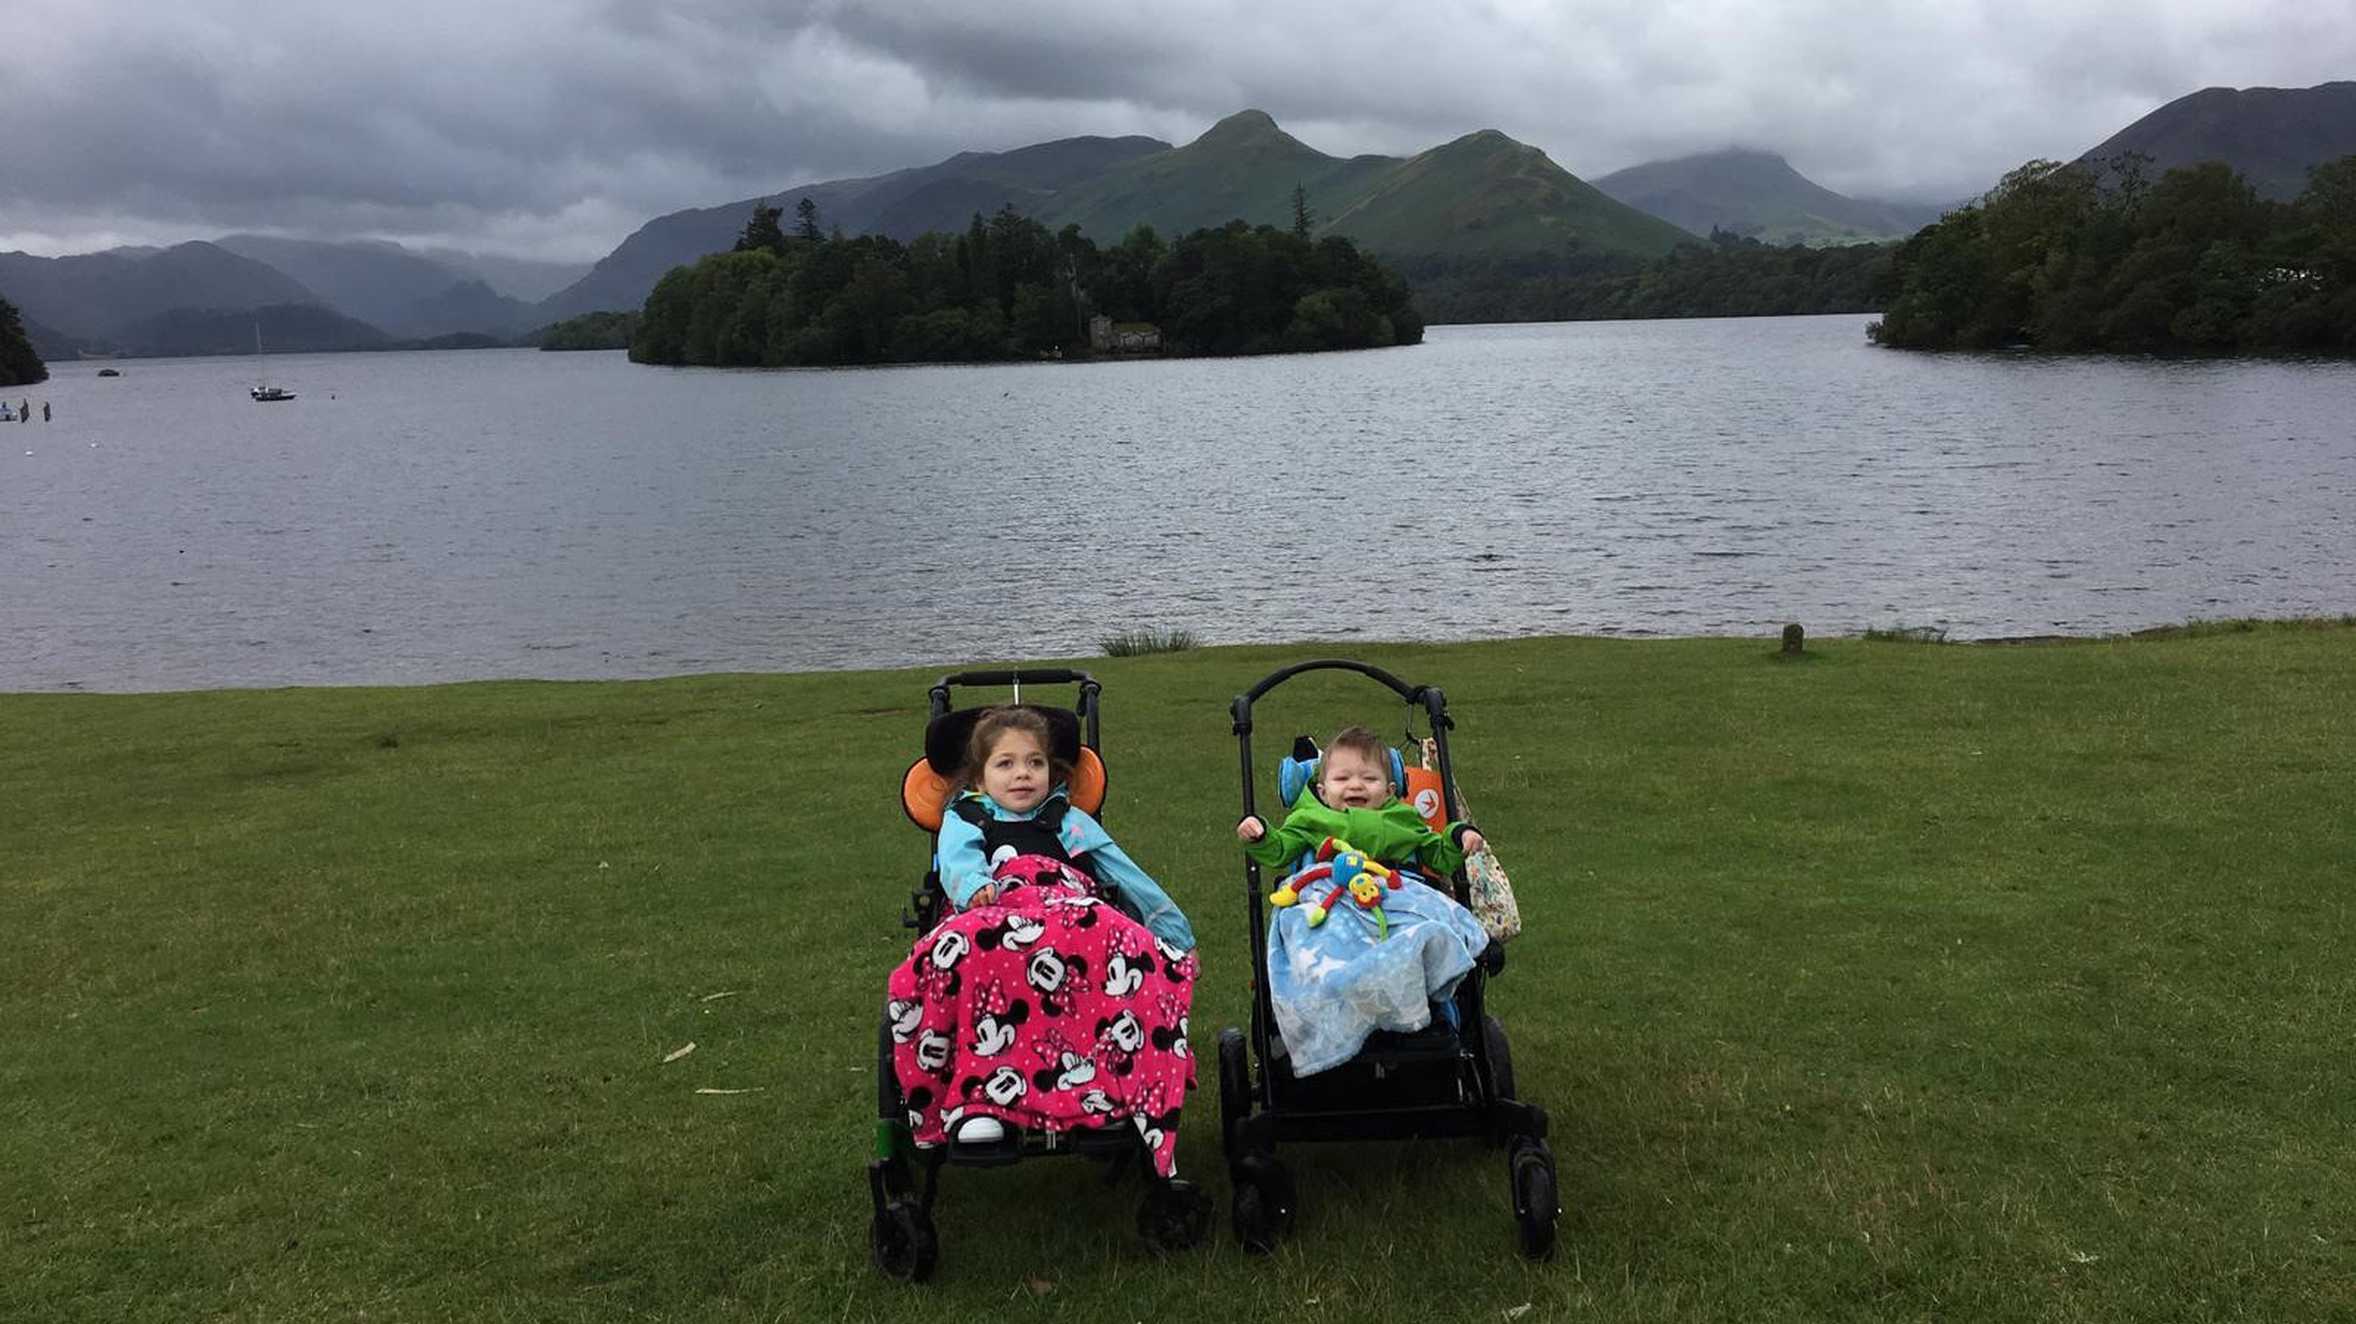 Aubree and her brother on the lake shore with the stunning Lake District scenery in the background.